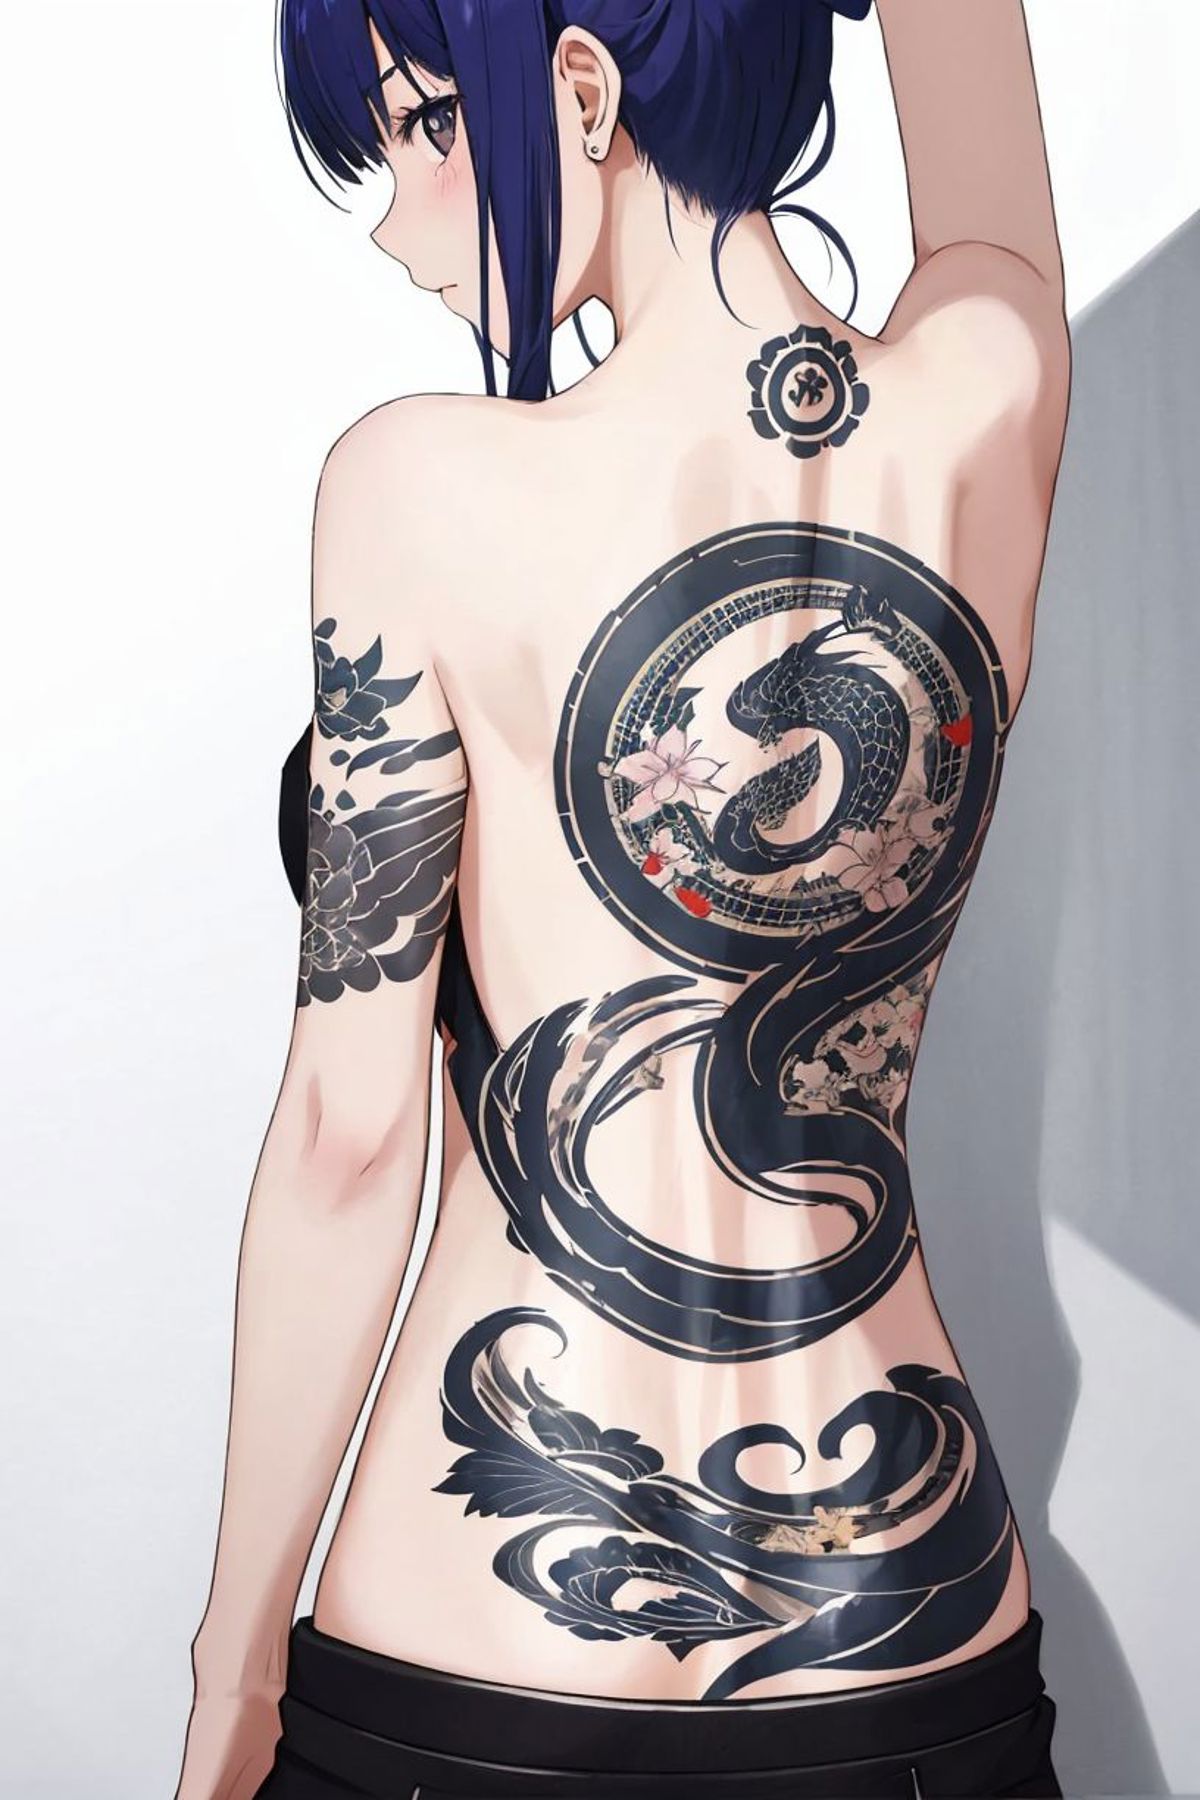 BackTattoo image by ForkY